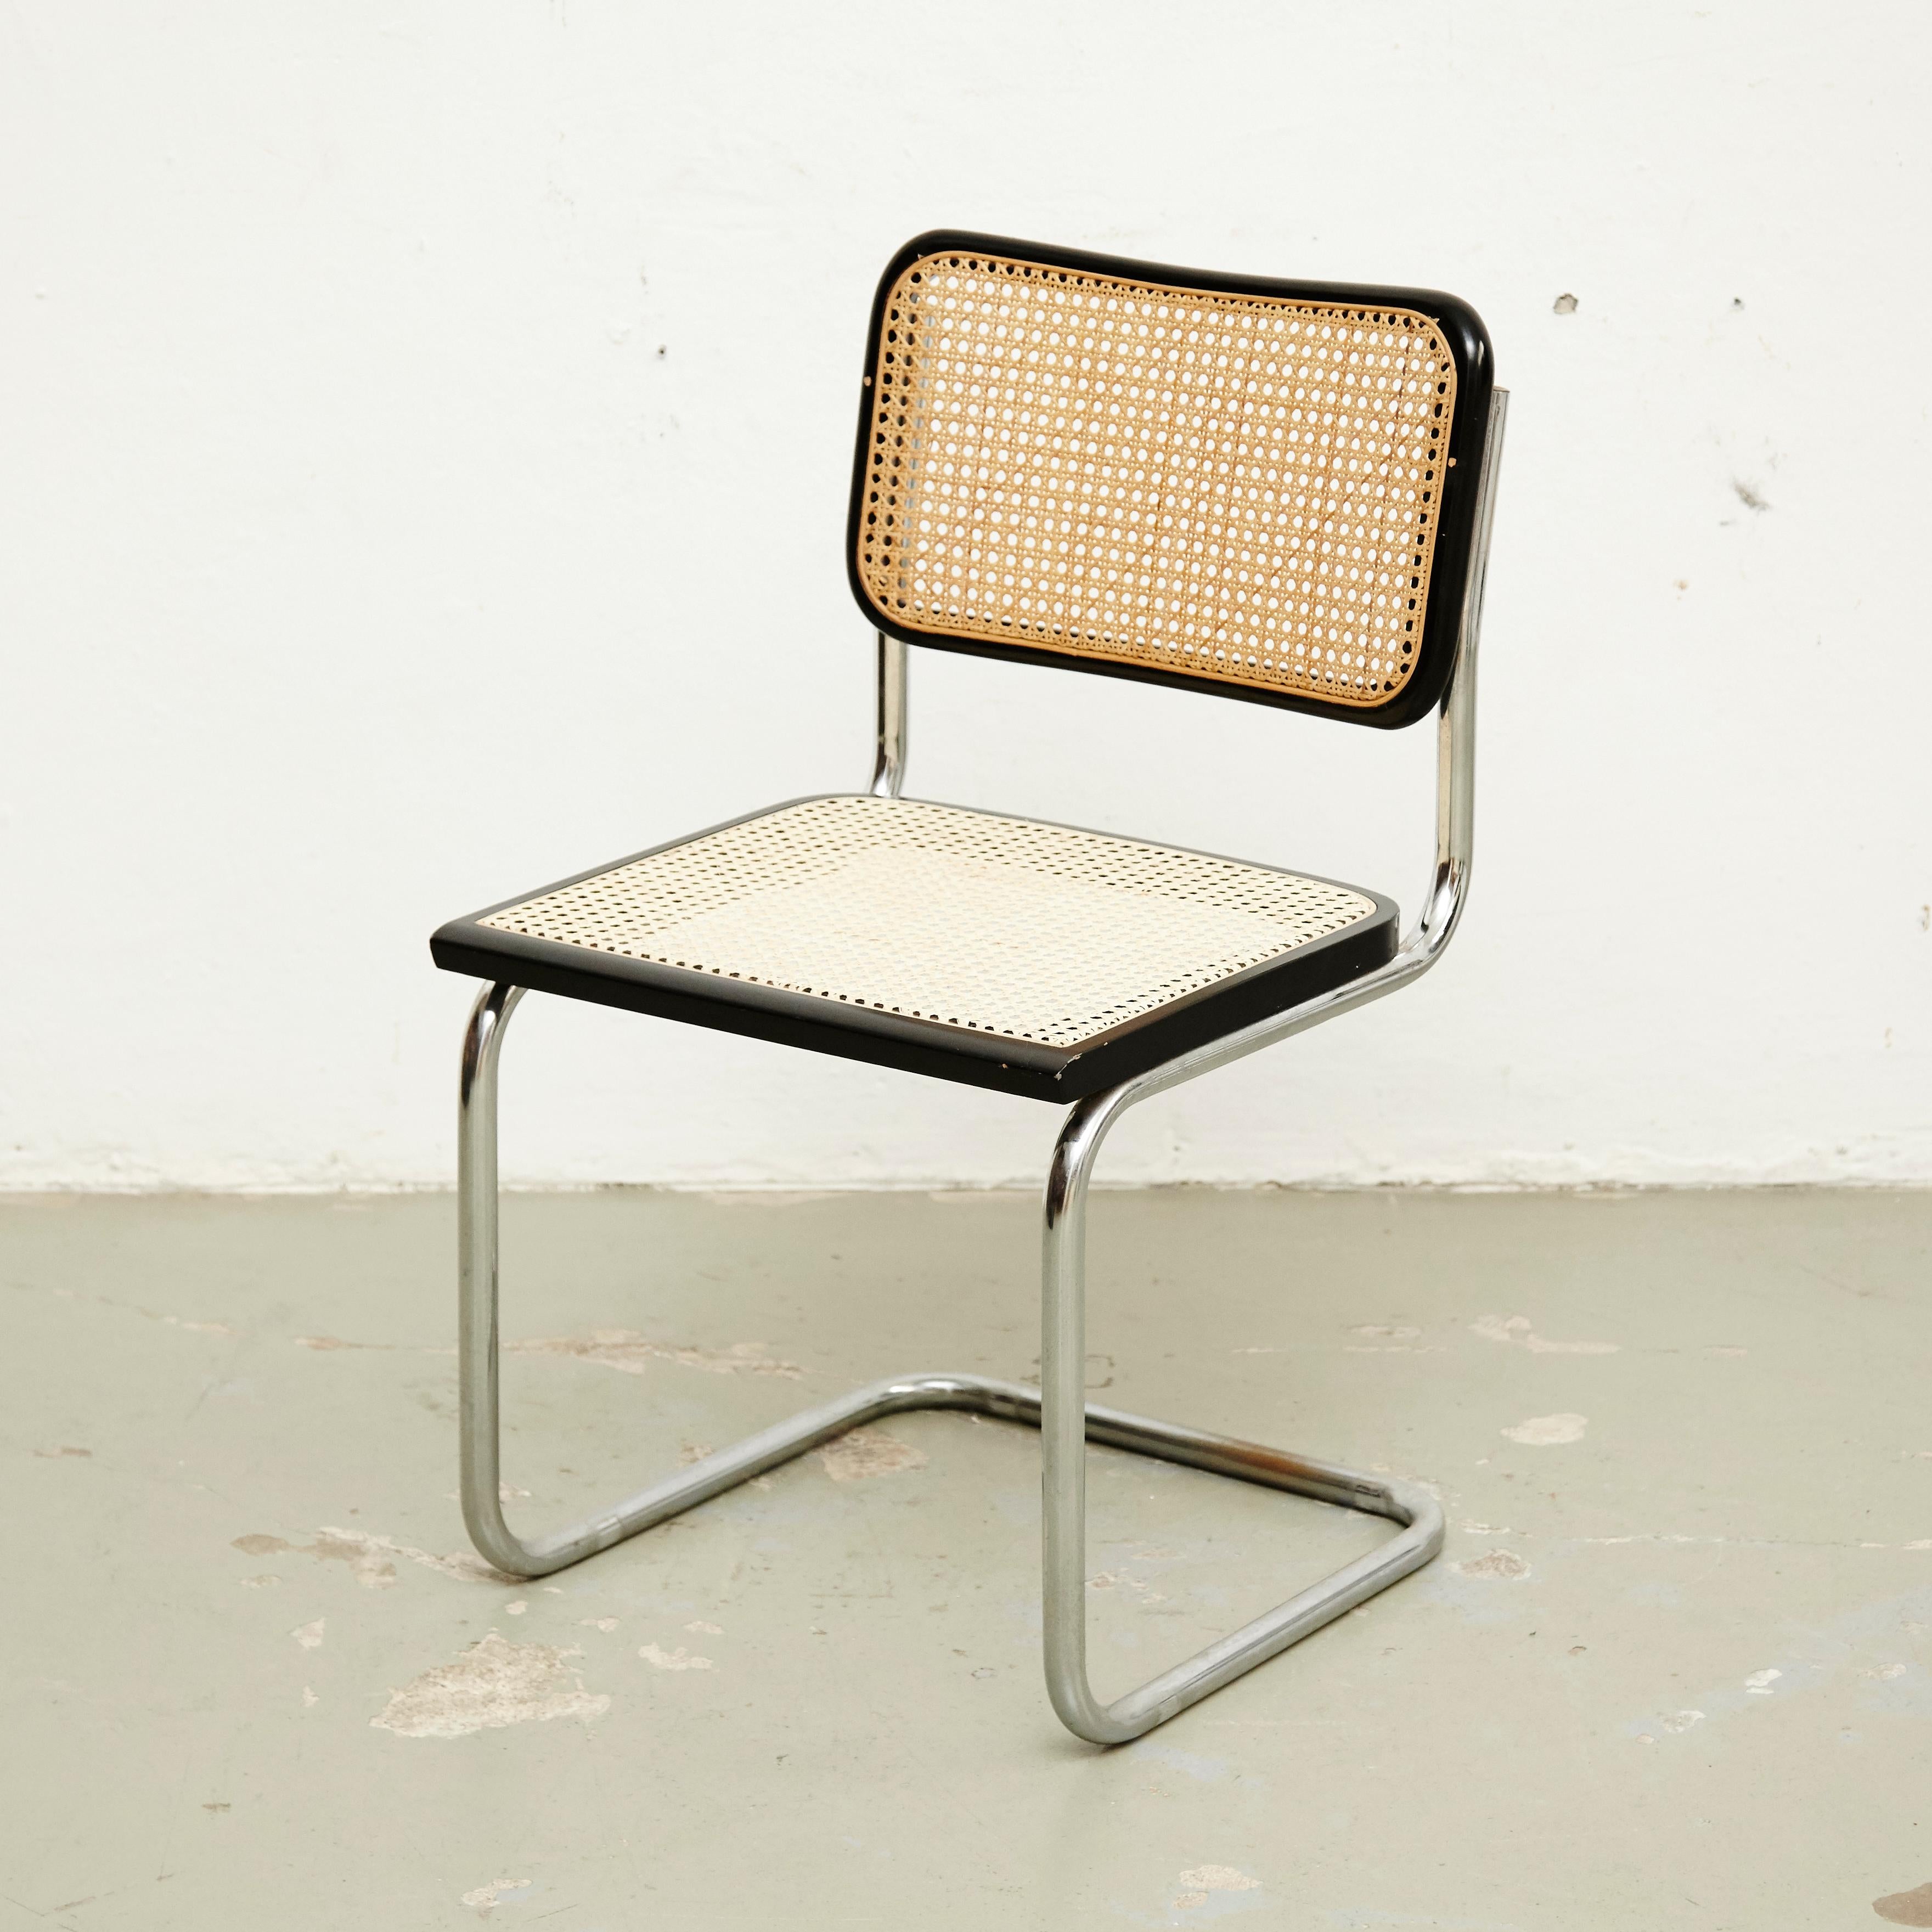 Chair, model Cesca, designed by Marcel Breuer around 1970, manufactured in Italy.
Metal pipe frame, wood seat and back structure and rattan.

 In good condition, with minor wear consistent with age and use, preserving a beautiful patina. The seat